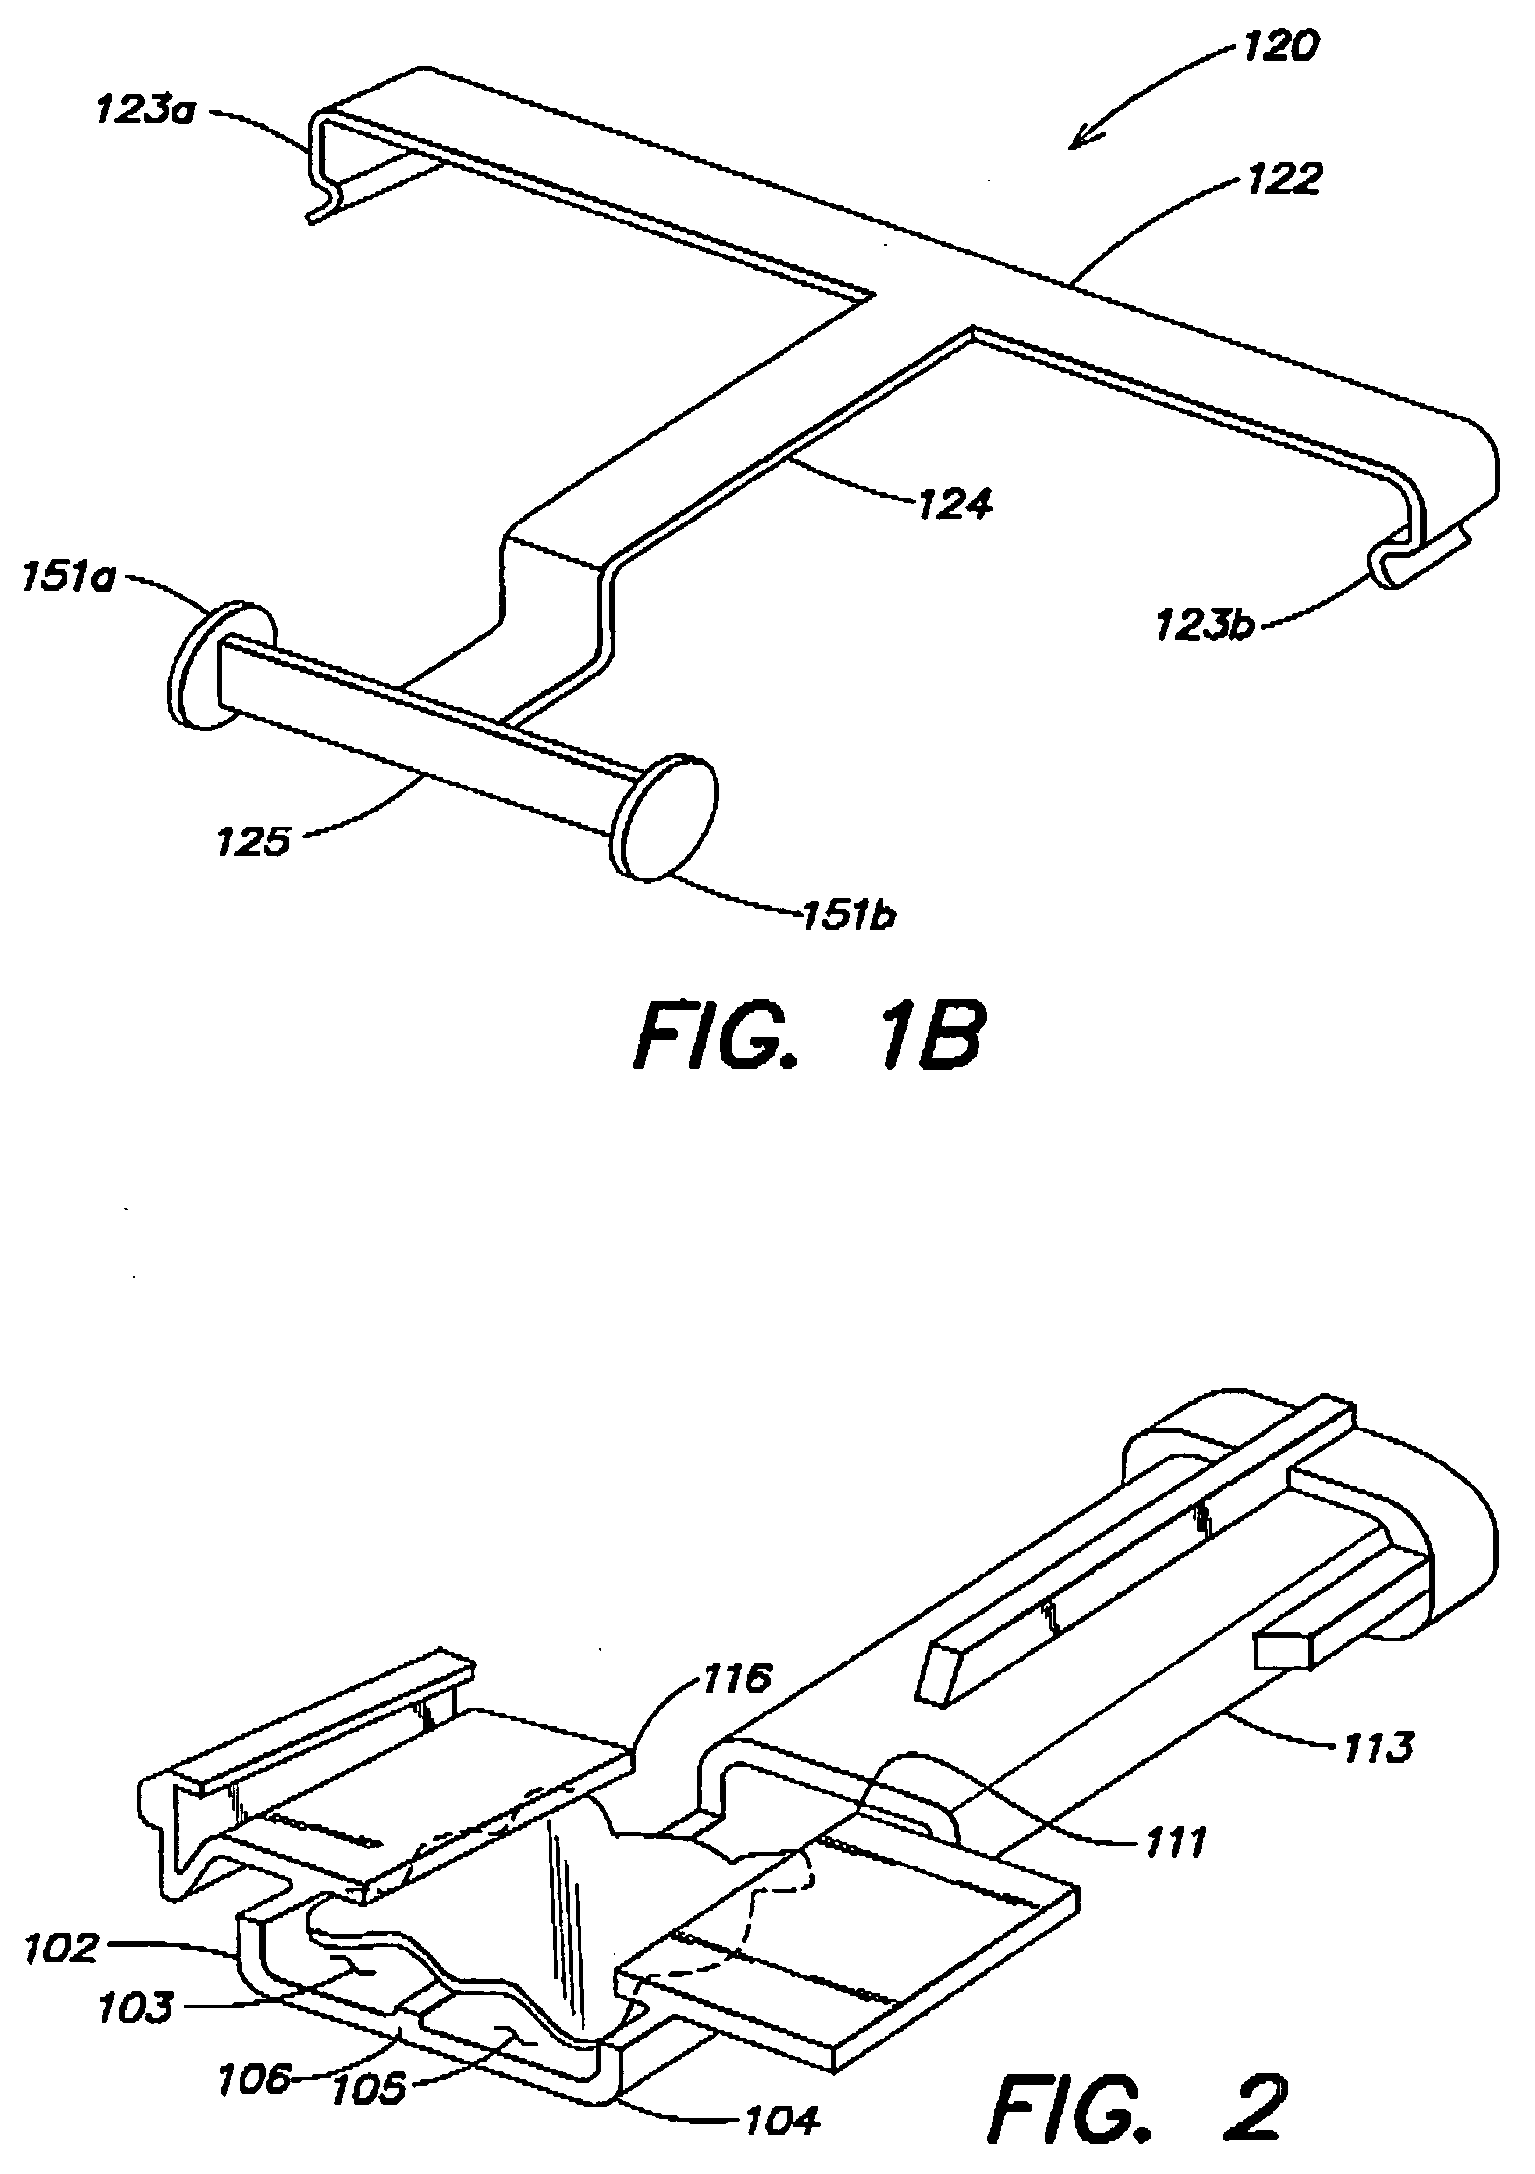 Intraocular lens injector subassembly